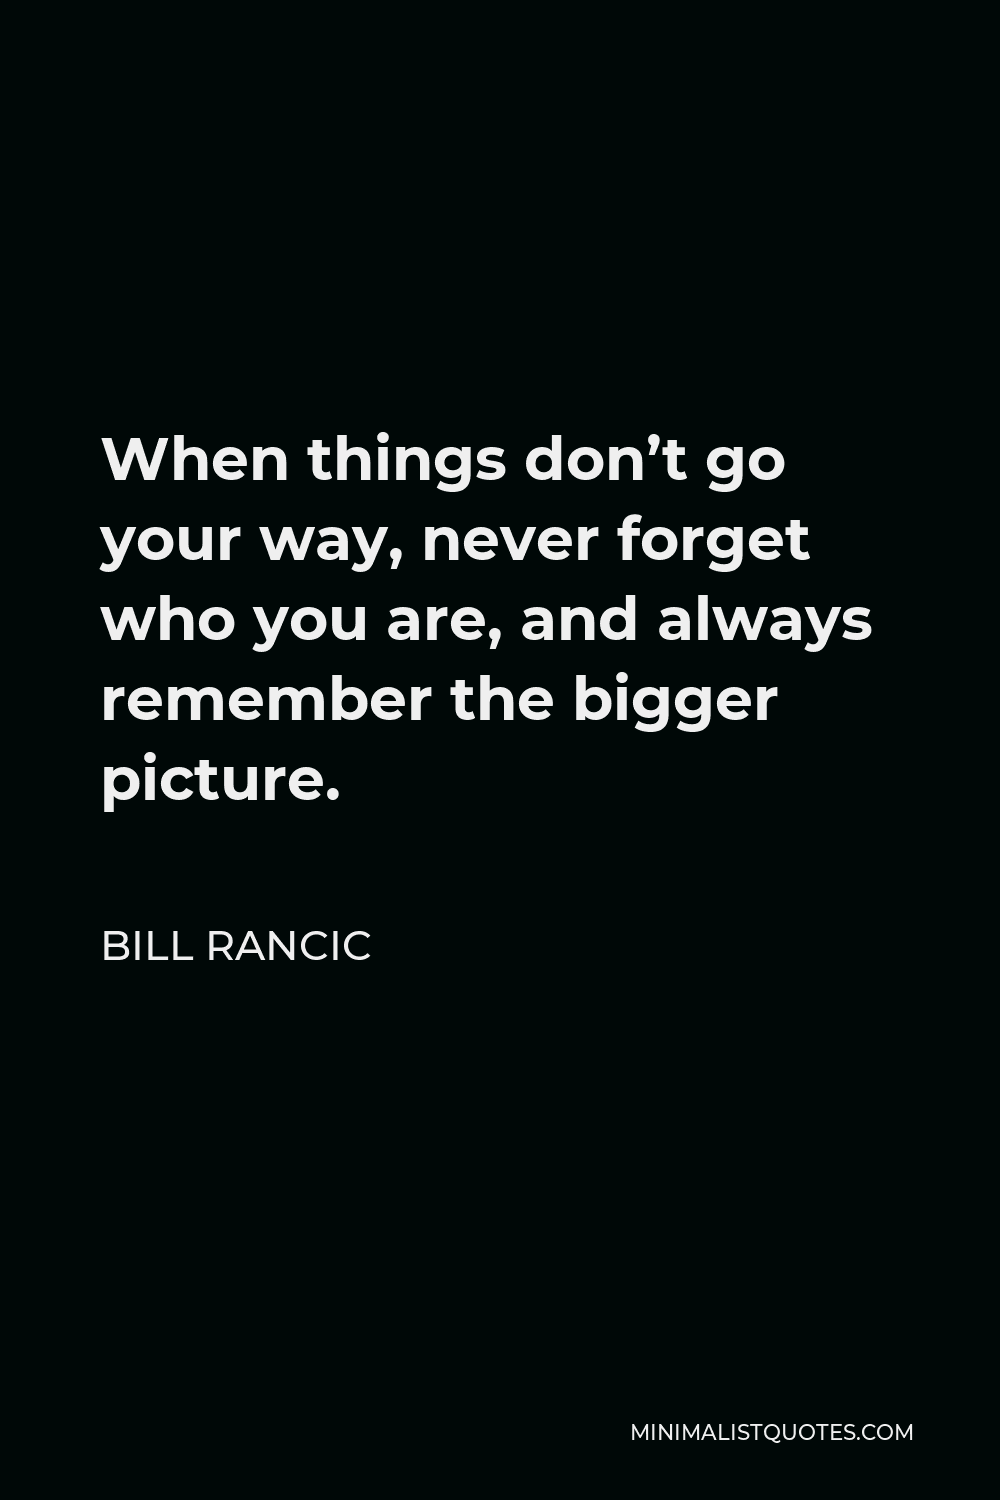 Bill Rancic Quote - When things don’t go your way, never forget who you are, and always remember the bigger picture.